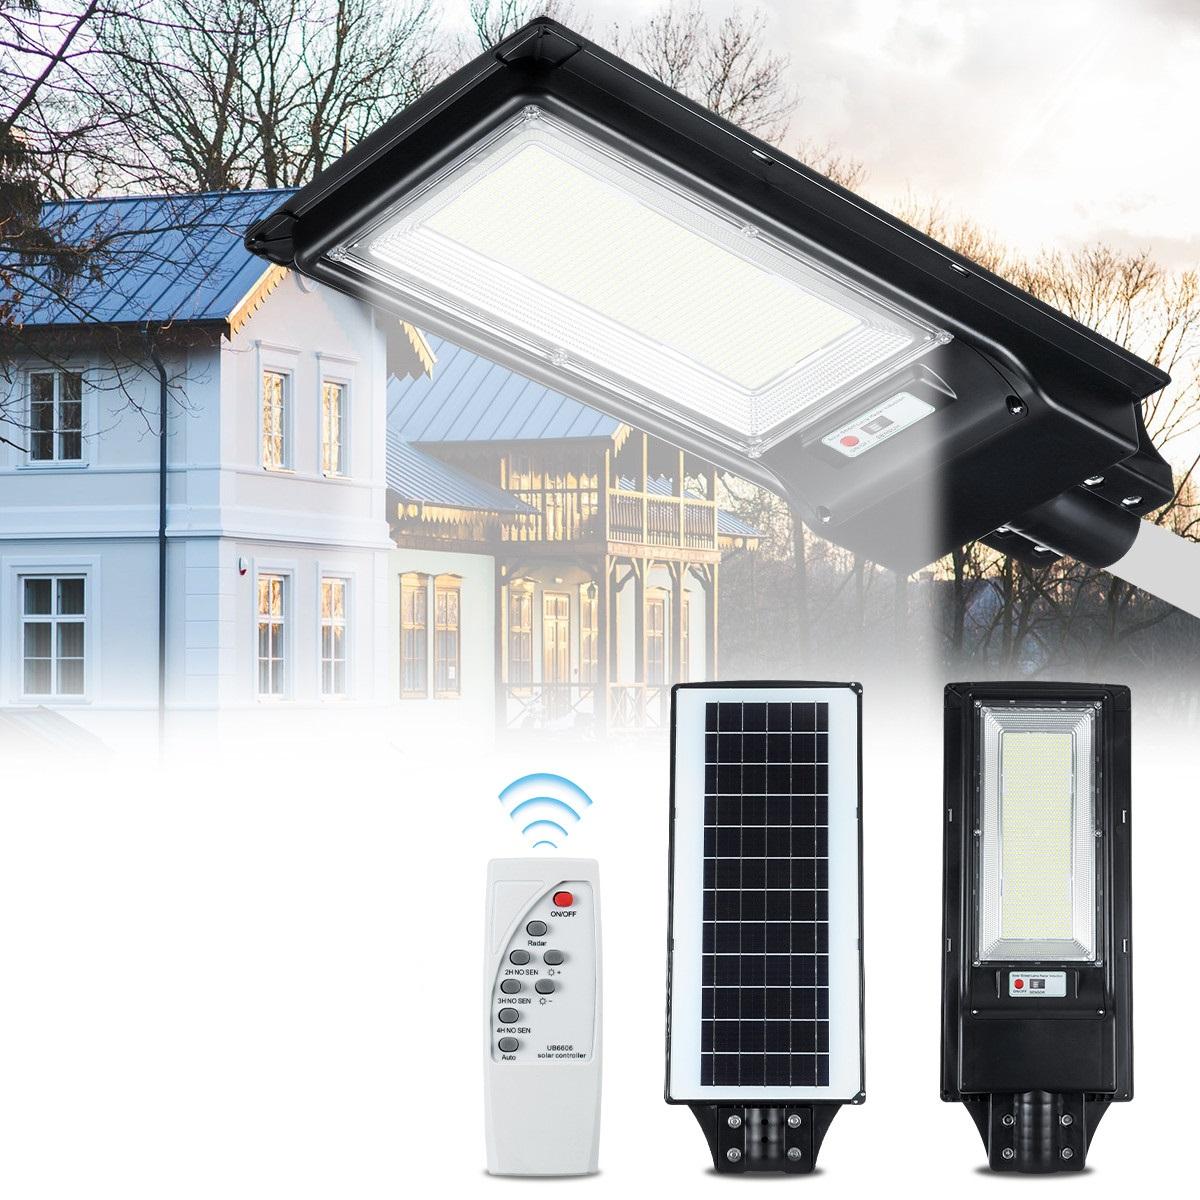 Image of 492/966LED Solar Street Light Motion Sensor Outdoor Waterproof Wall Lamp with Remote